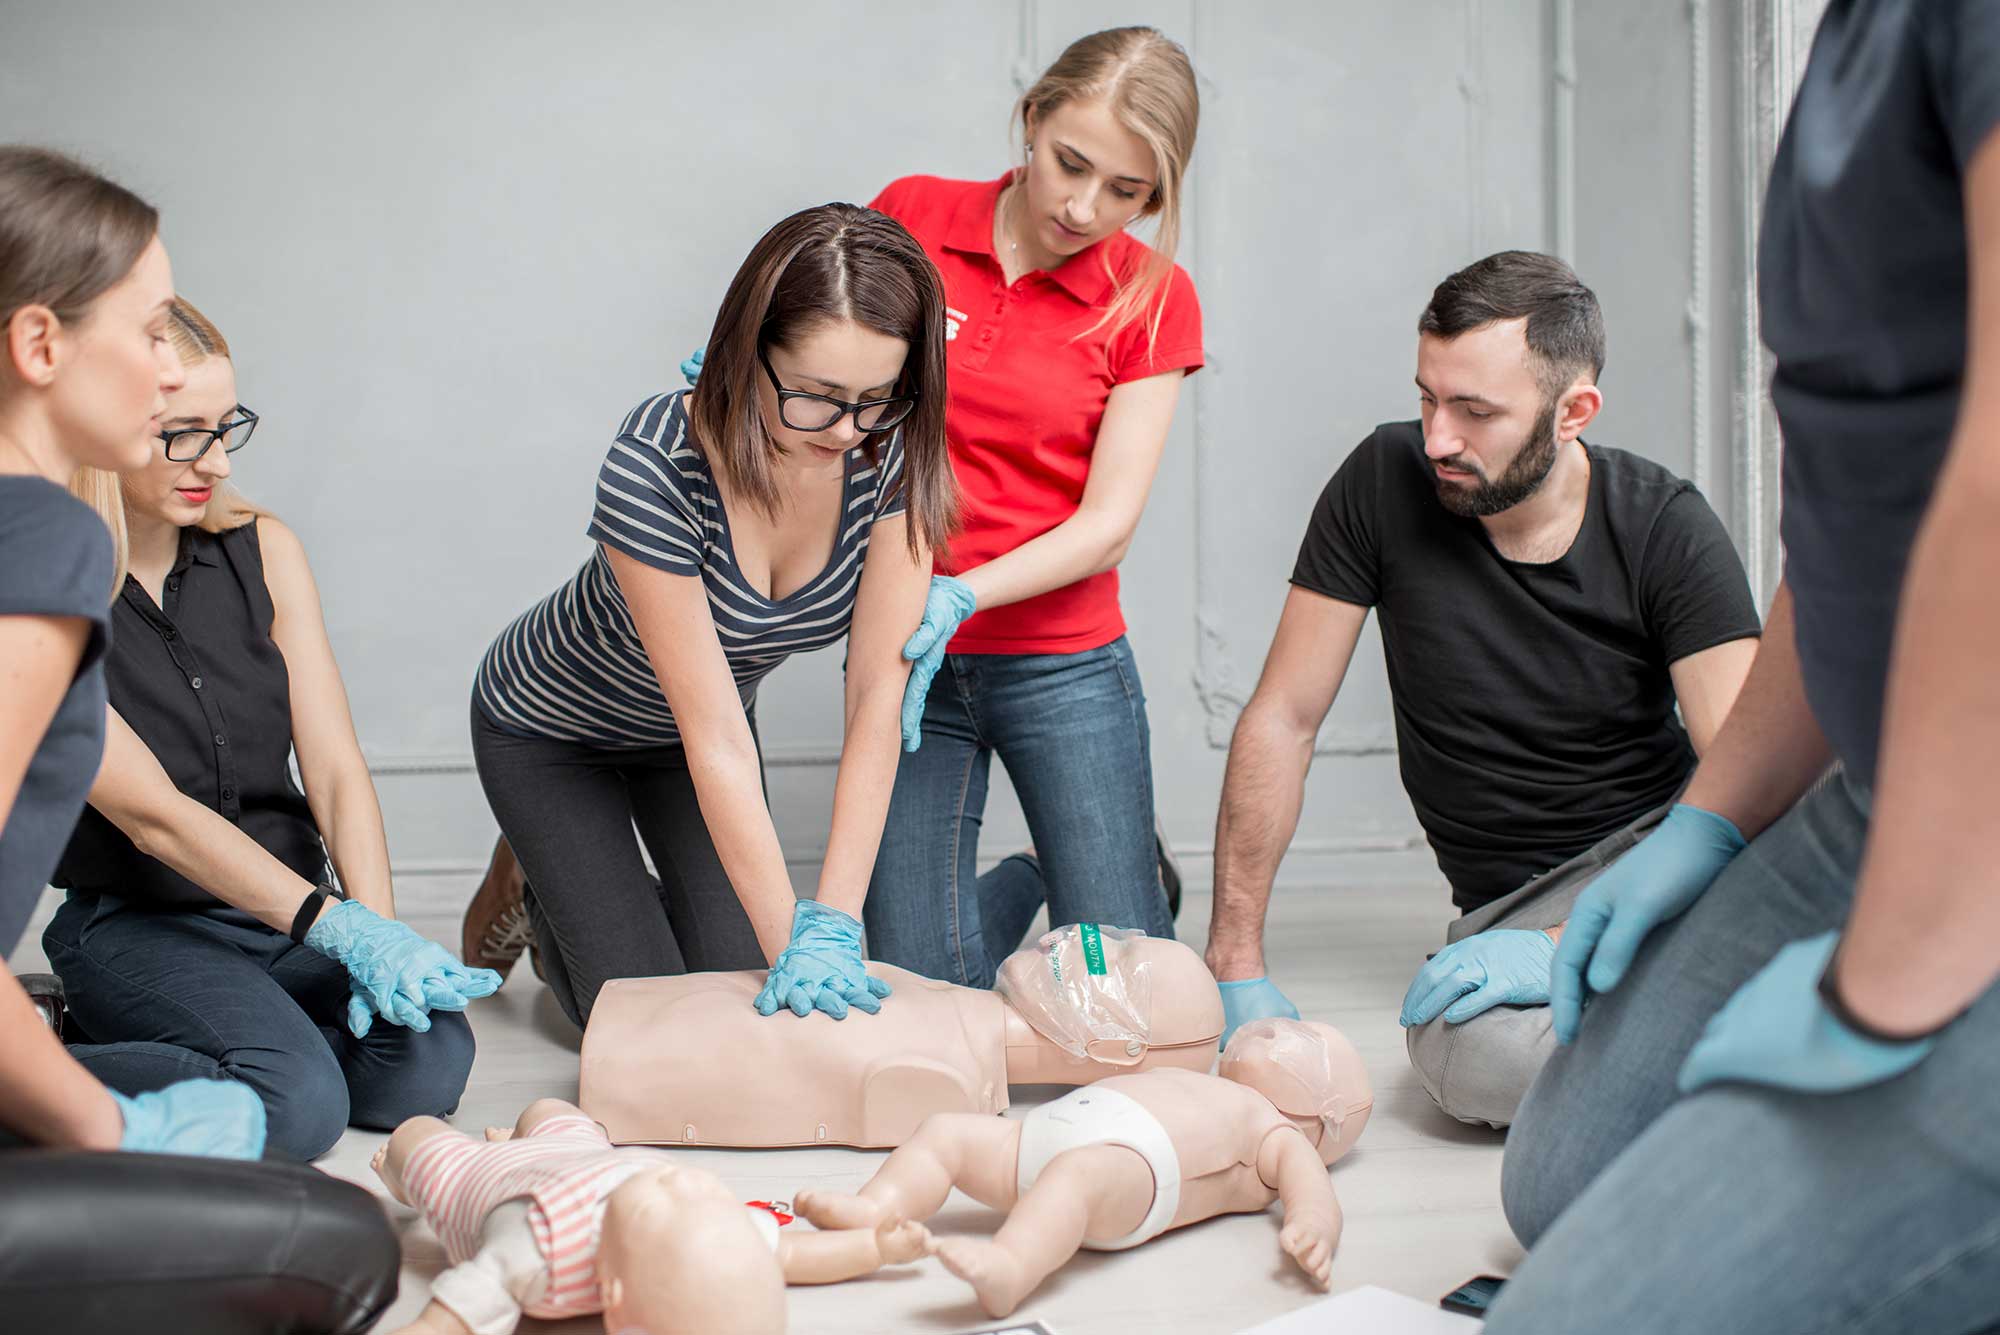 Private first aid training courses in Brisbane & the Gold Coast